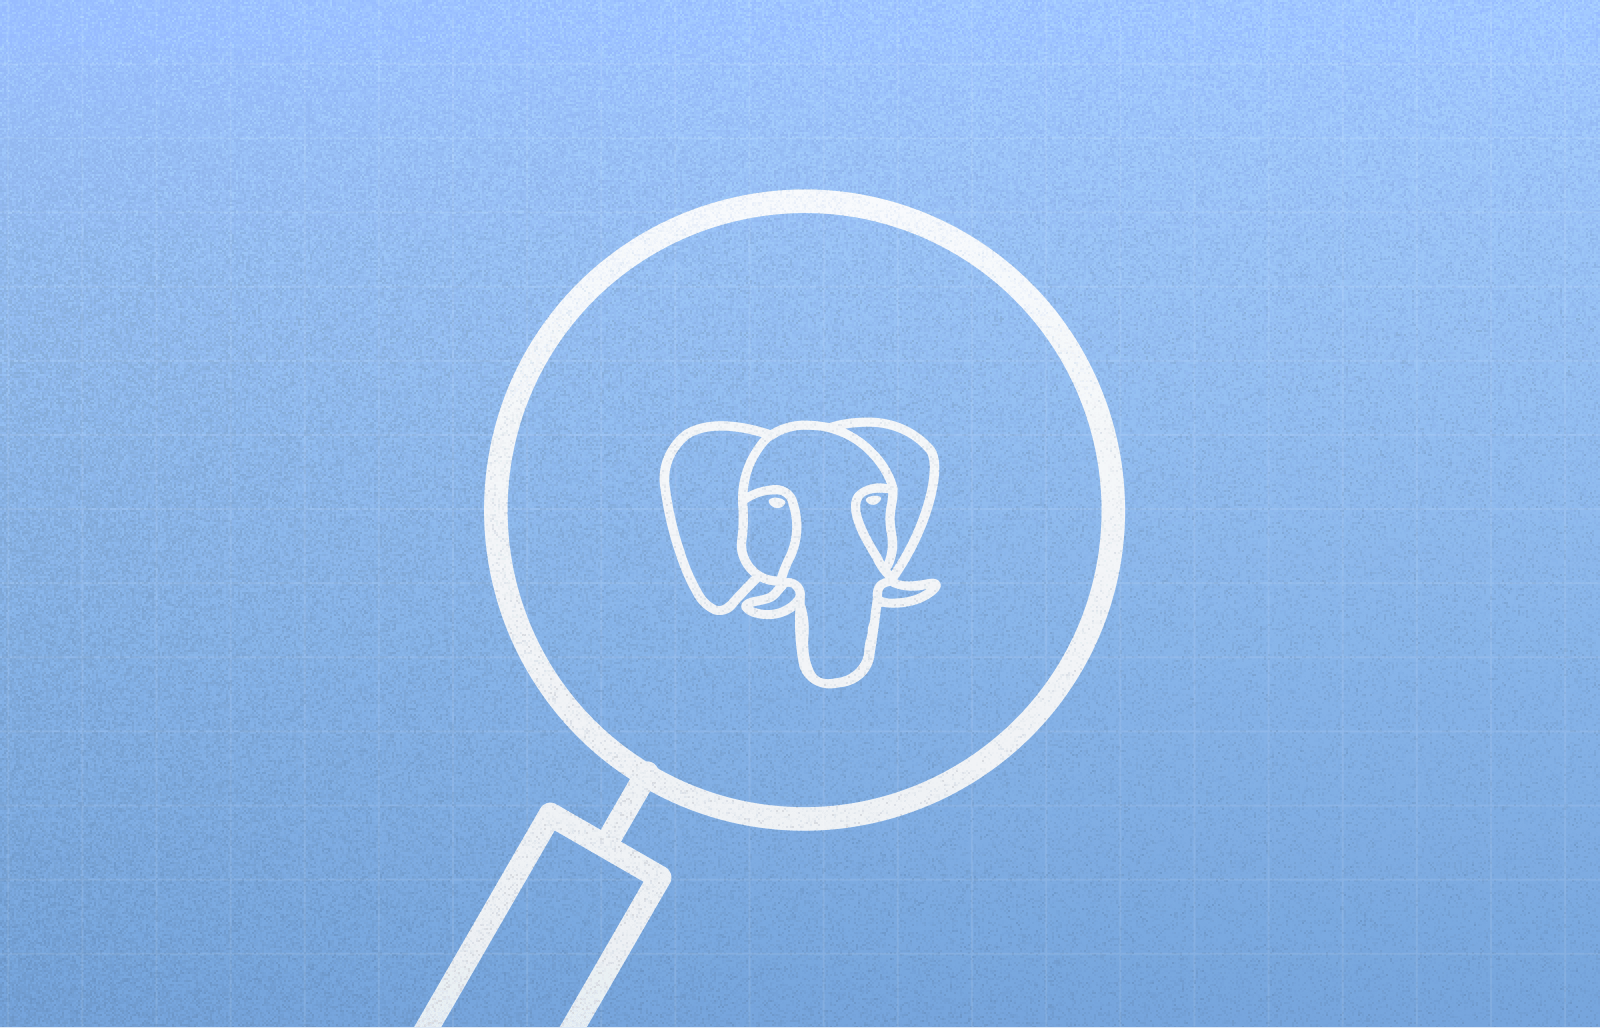 Postgres full-text search